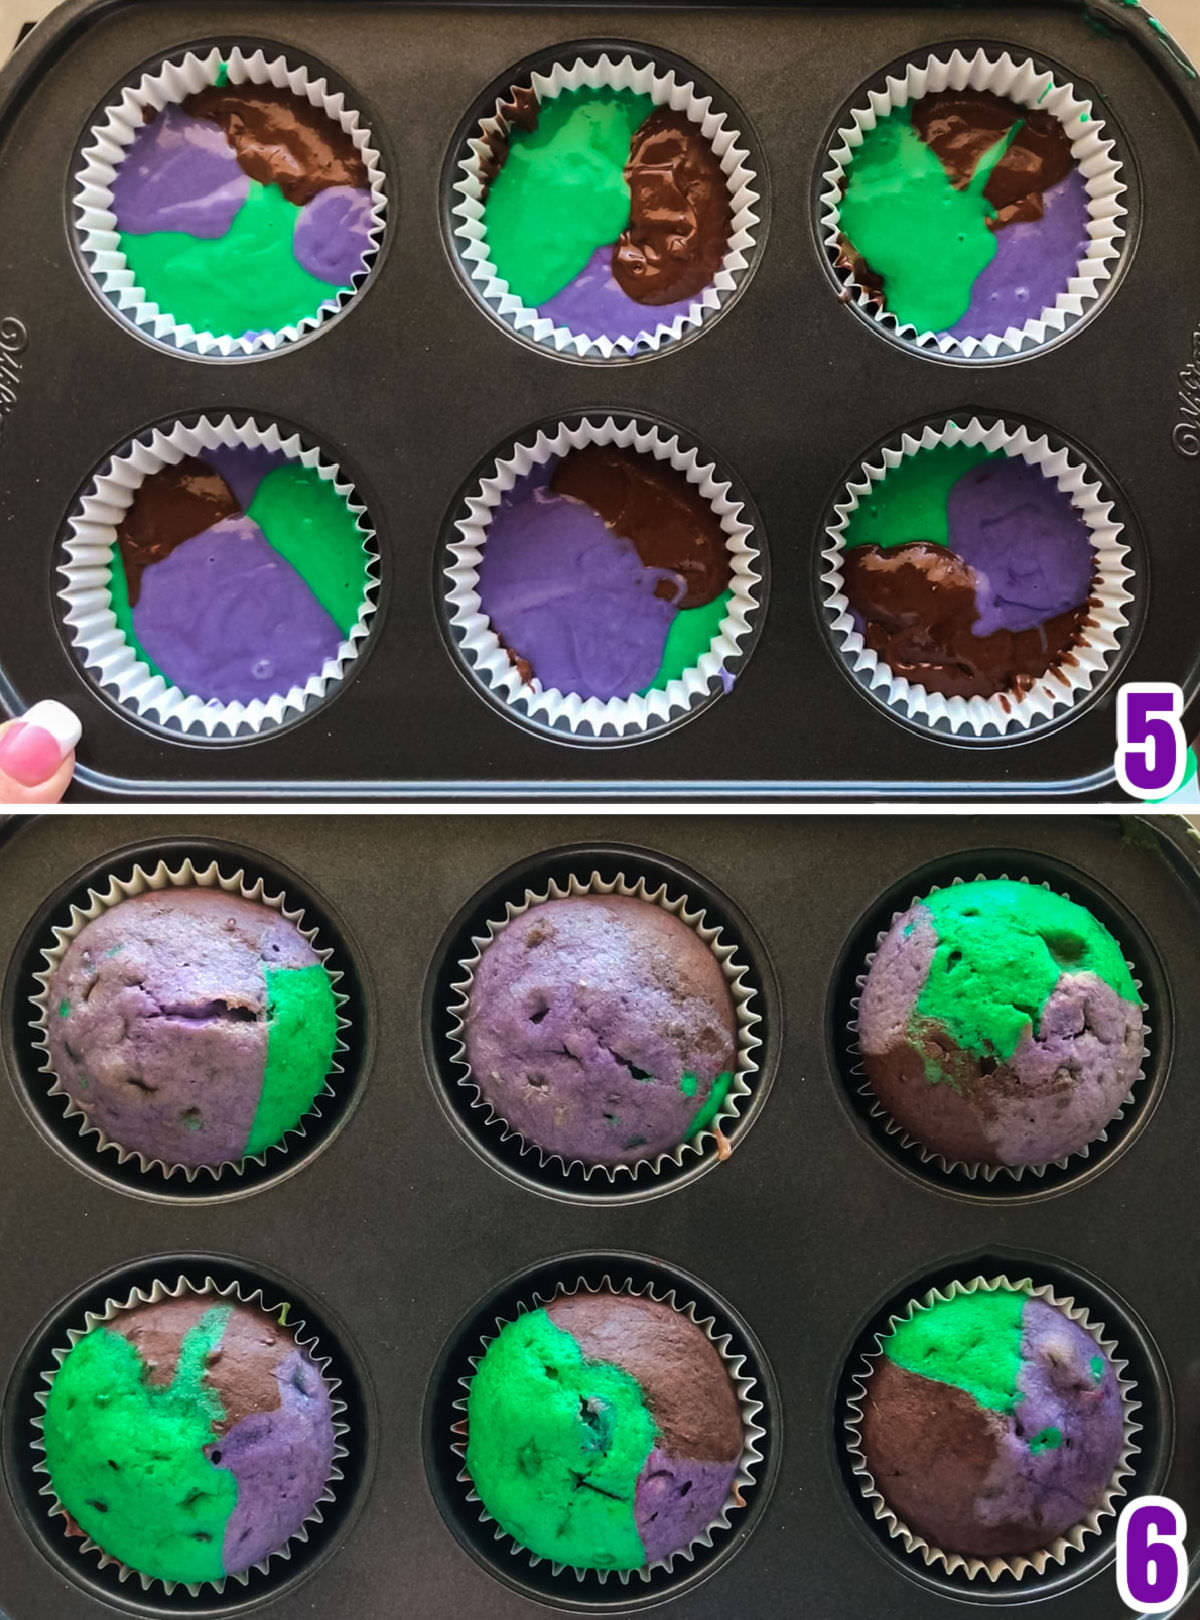 Collage image showing the Bewitched Marble Cupcakes before they went into the oven and after they come out of the oven.